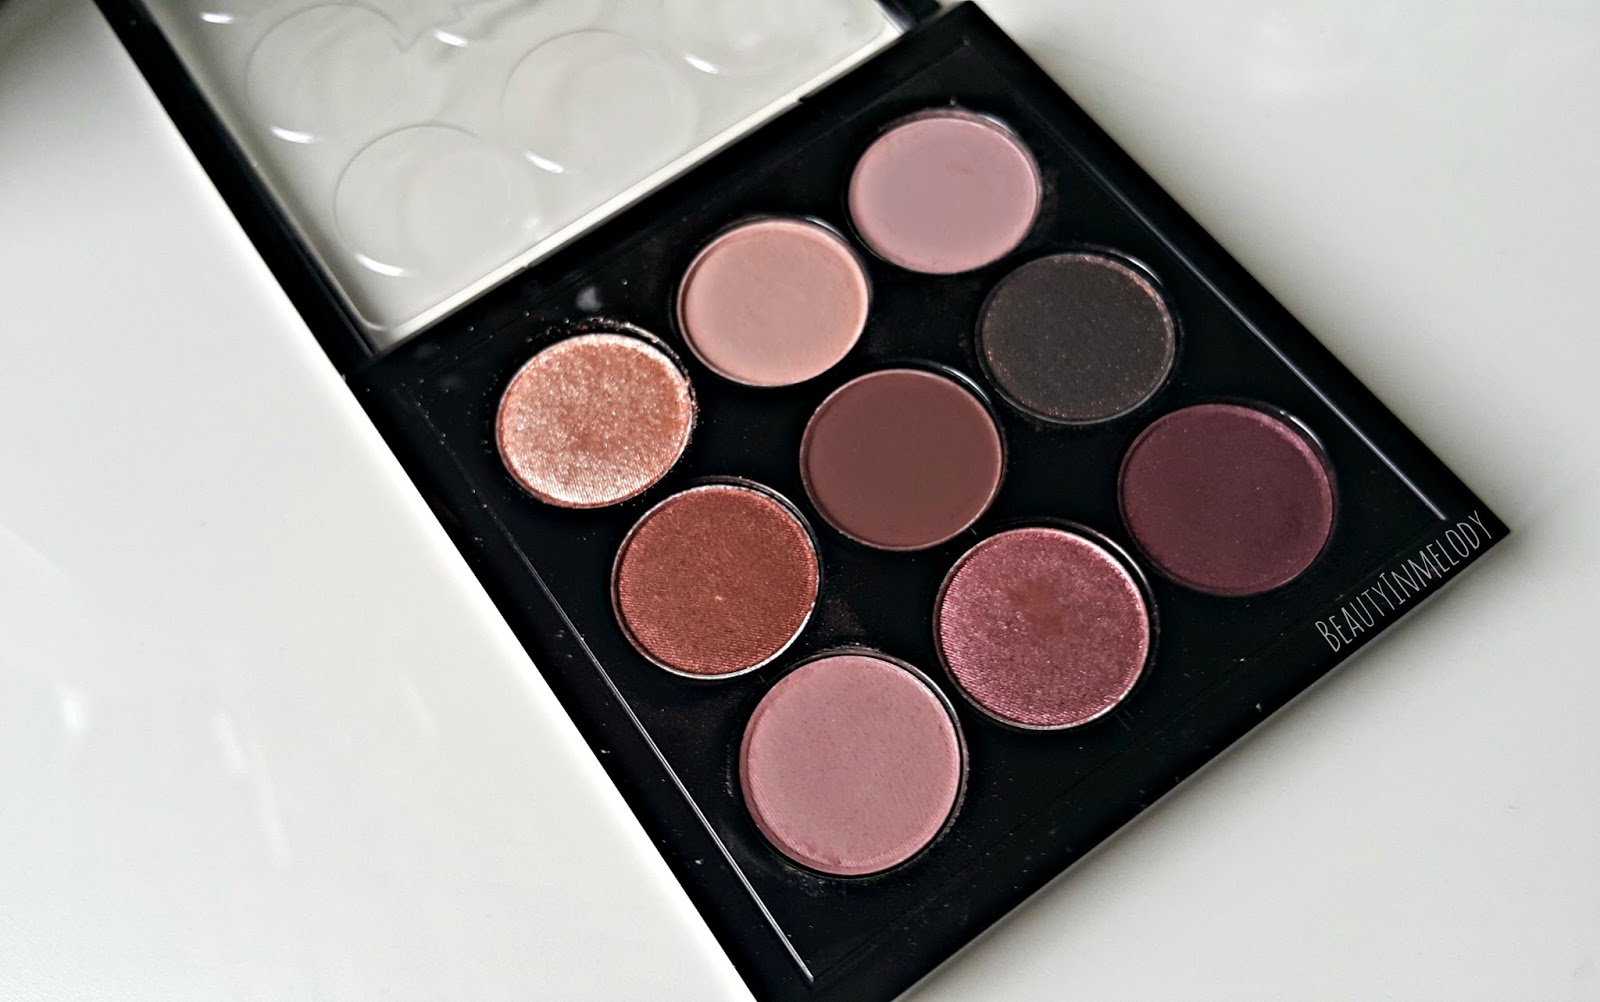 Brand: M.A.C. Other than the Burgundy palette I got from the Eyes on Mac co...